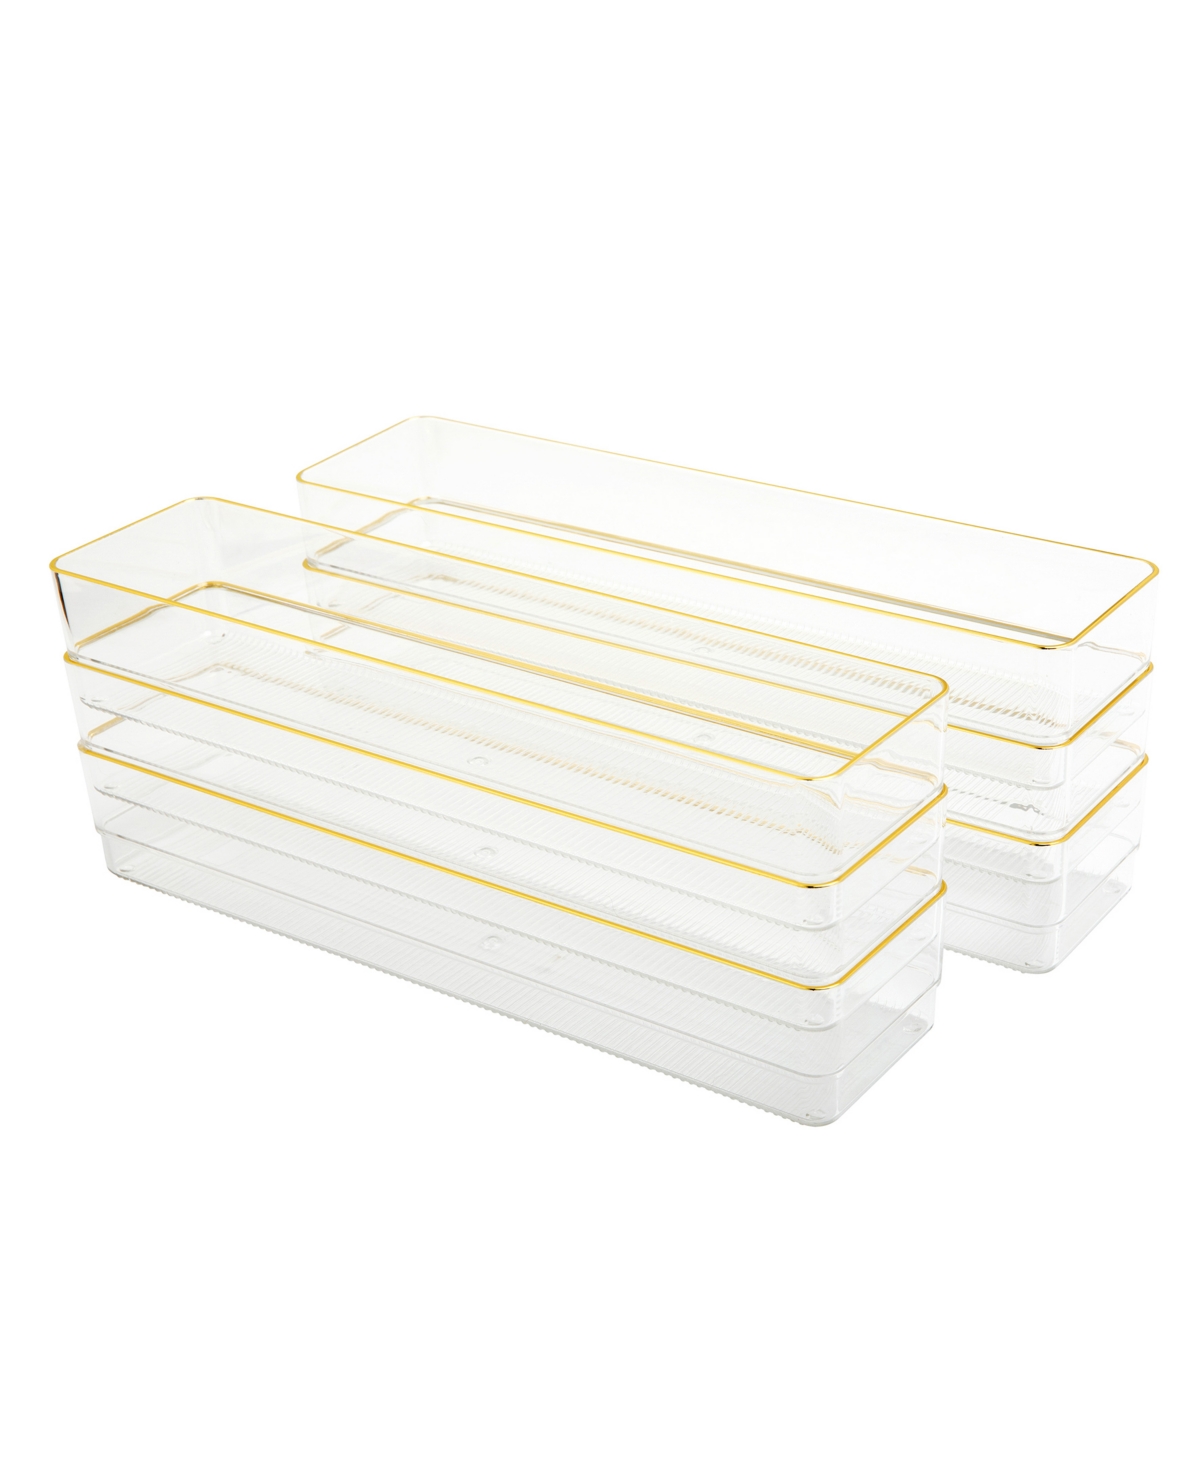 Kerry 6 Piece Plastic Stackable Office Desk Drawer Organizers, 12" x 3" - Clear, Gold Trim